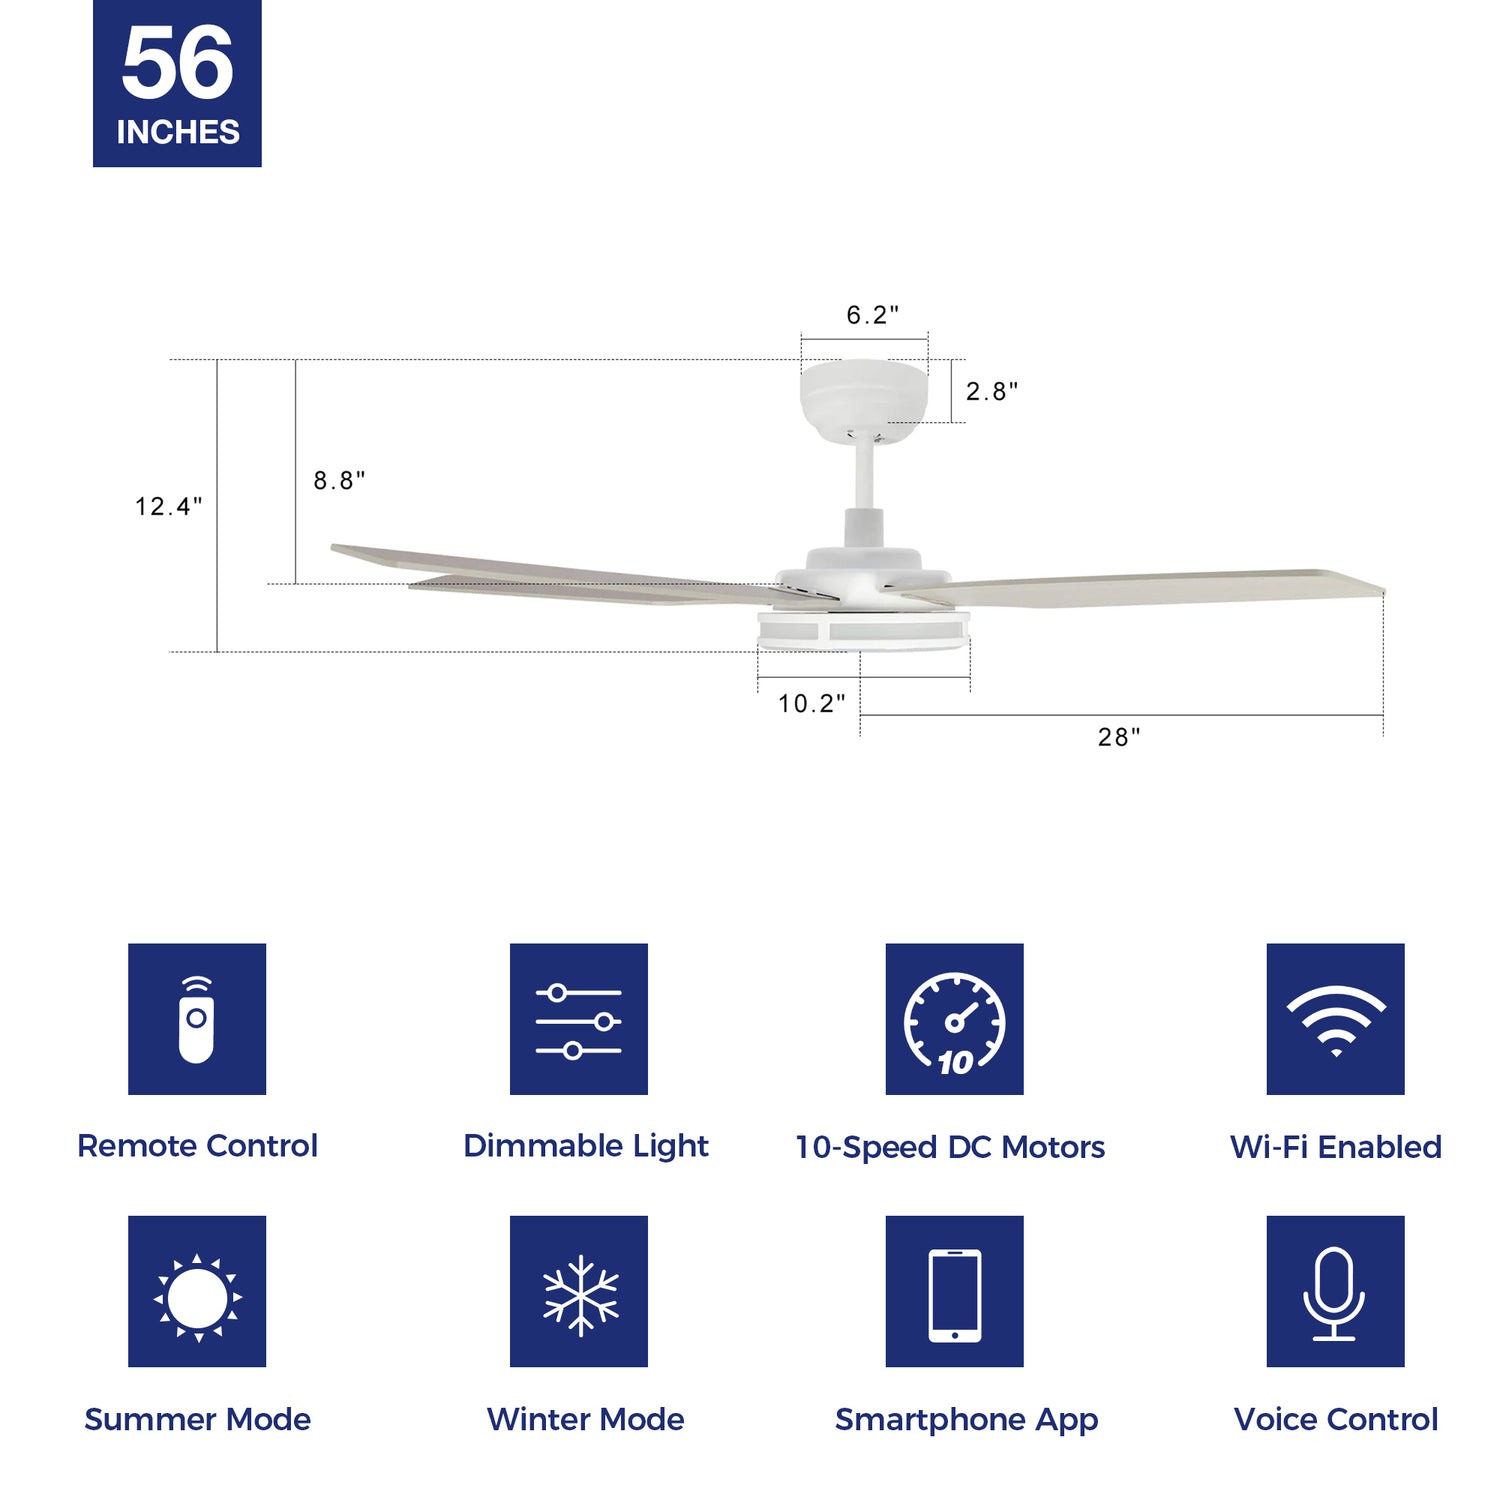 Explorer Outdoor 56&quot; Smart Ceiling Fan with LED Light Kit-White Case and Fine Wood Fan Blades. The fan features Remote control, Wi-Fi apps, and Voice control technology (compatible with Amazon Alexa and Google Home Assistant ) to set fan preferences. Equipped with 3000-lumen dimmable LED lights and a 10-speed DC Motor (5300CFM airflow output), it brings you cool and bright. 